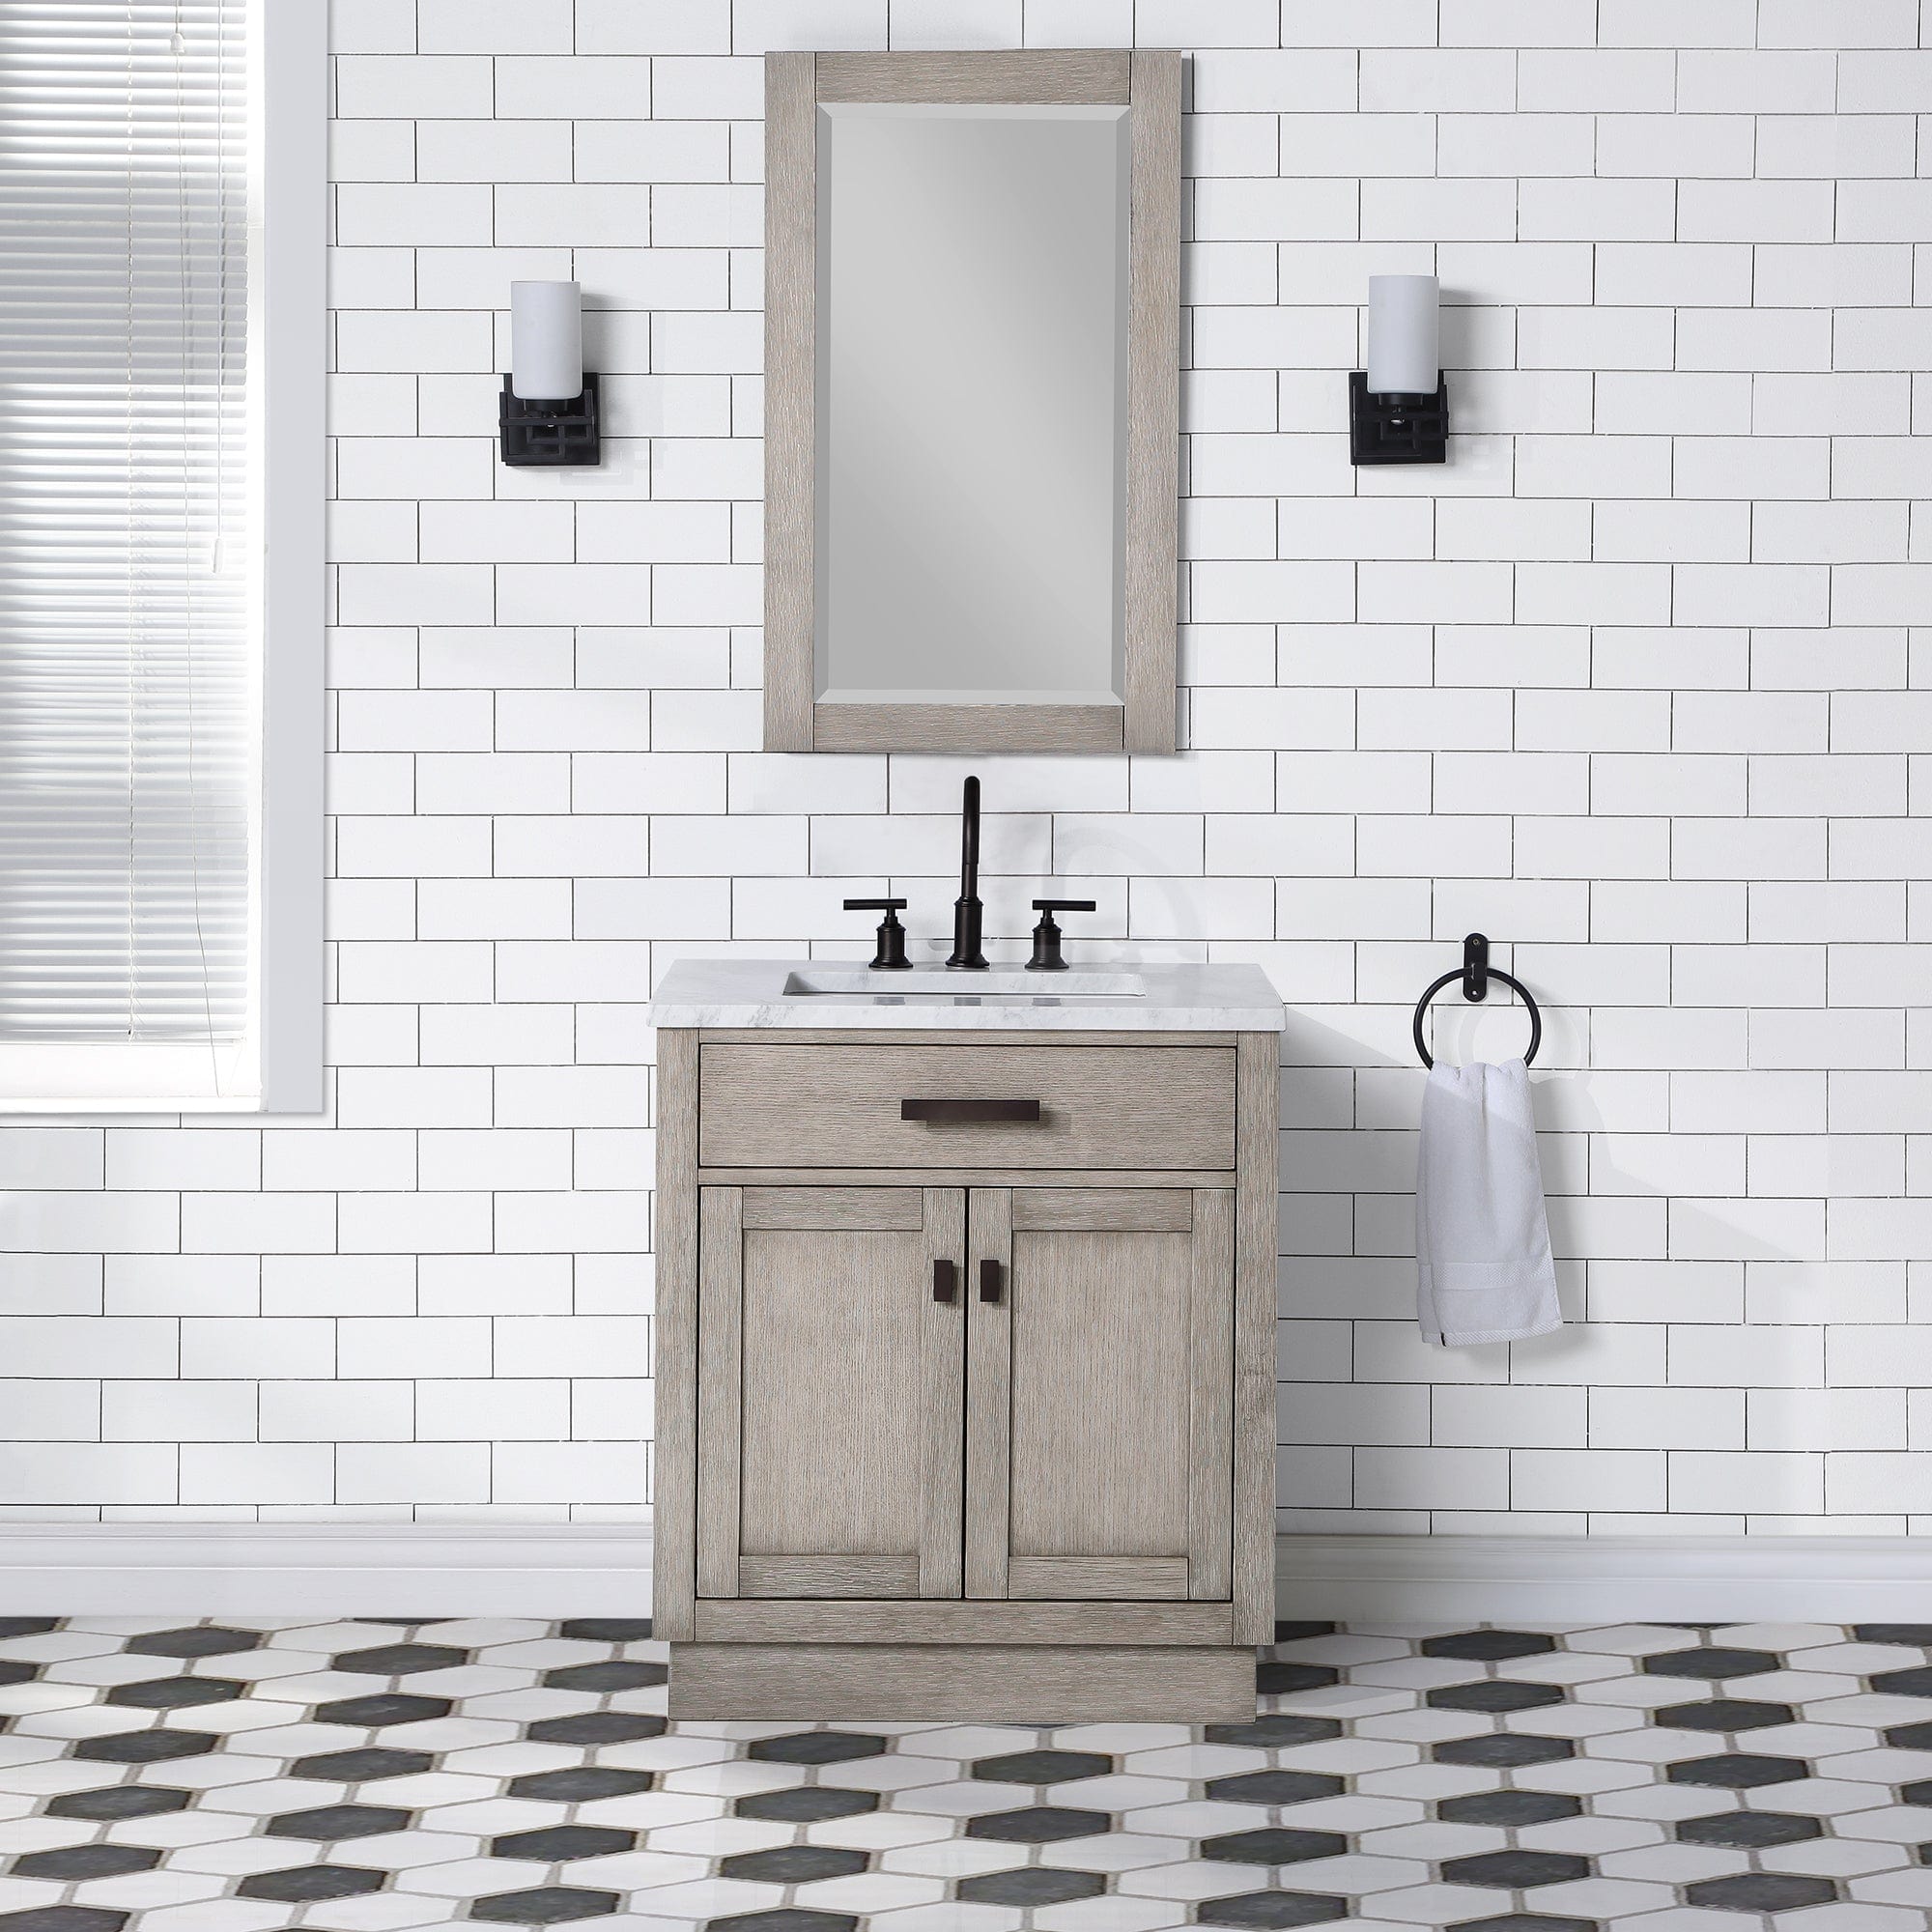 Chestnut 30 In. Single Sink Carrara White Marble Countertop Vanity In Grey Oak with Grooseneck Faucet and Mirror - Molaix732030764675CH30CW03GK-R21BL1403